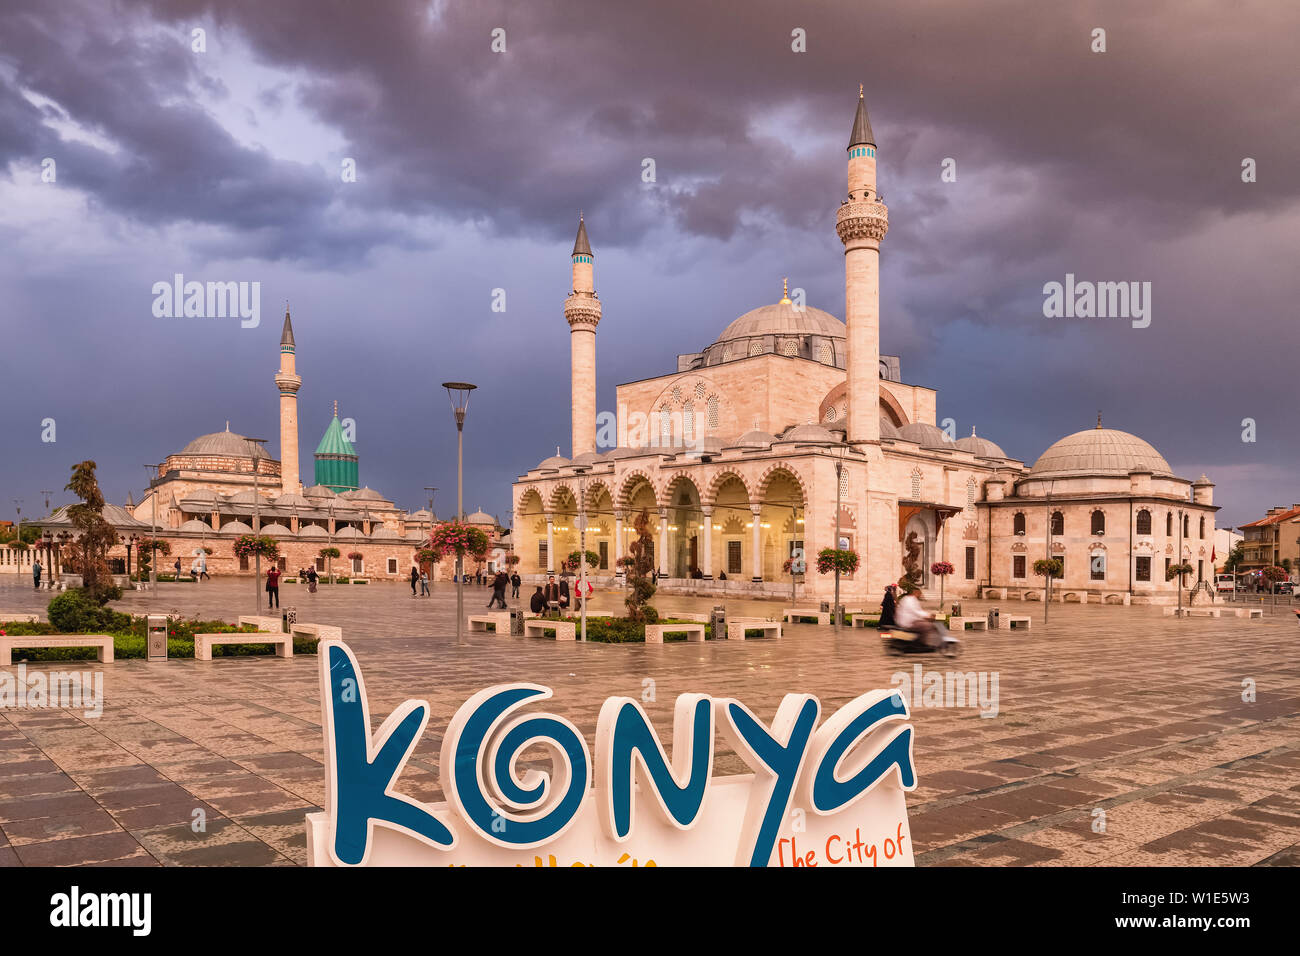 The central square of the old town with the Mevlana Museum on the background and Selimiye Mosque Stock Photo